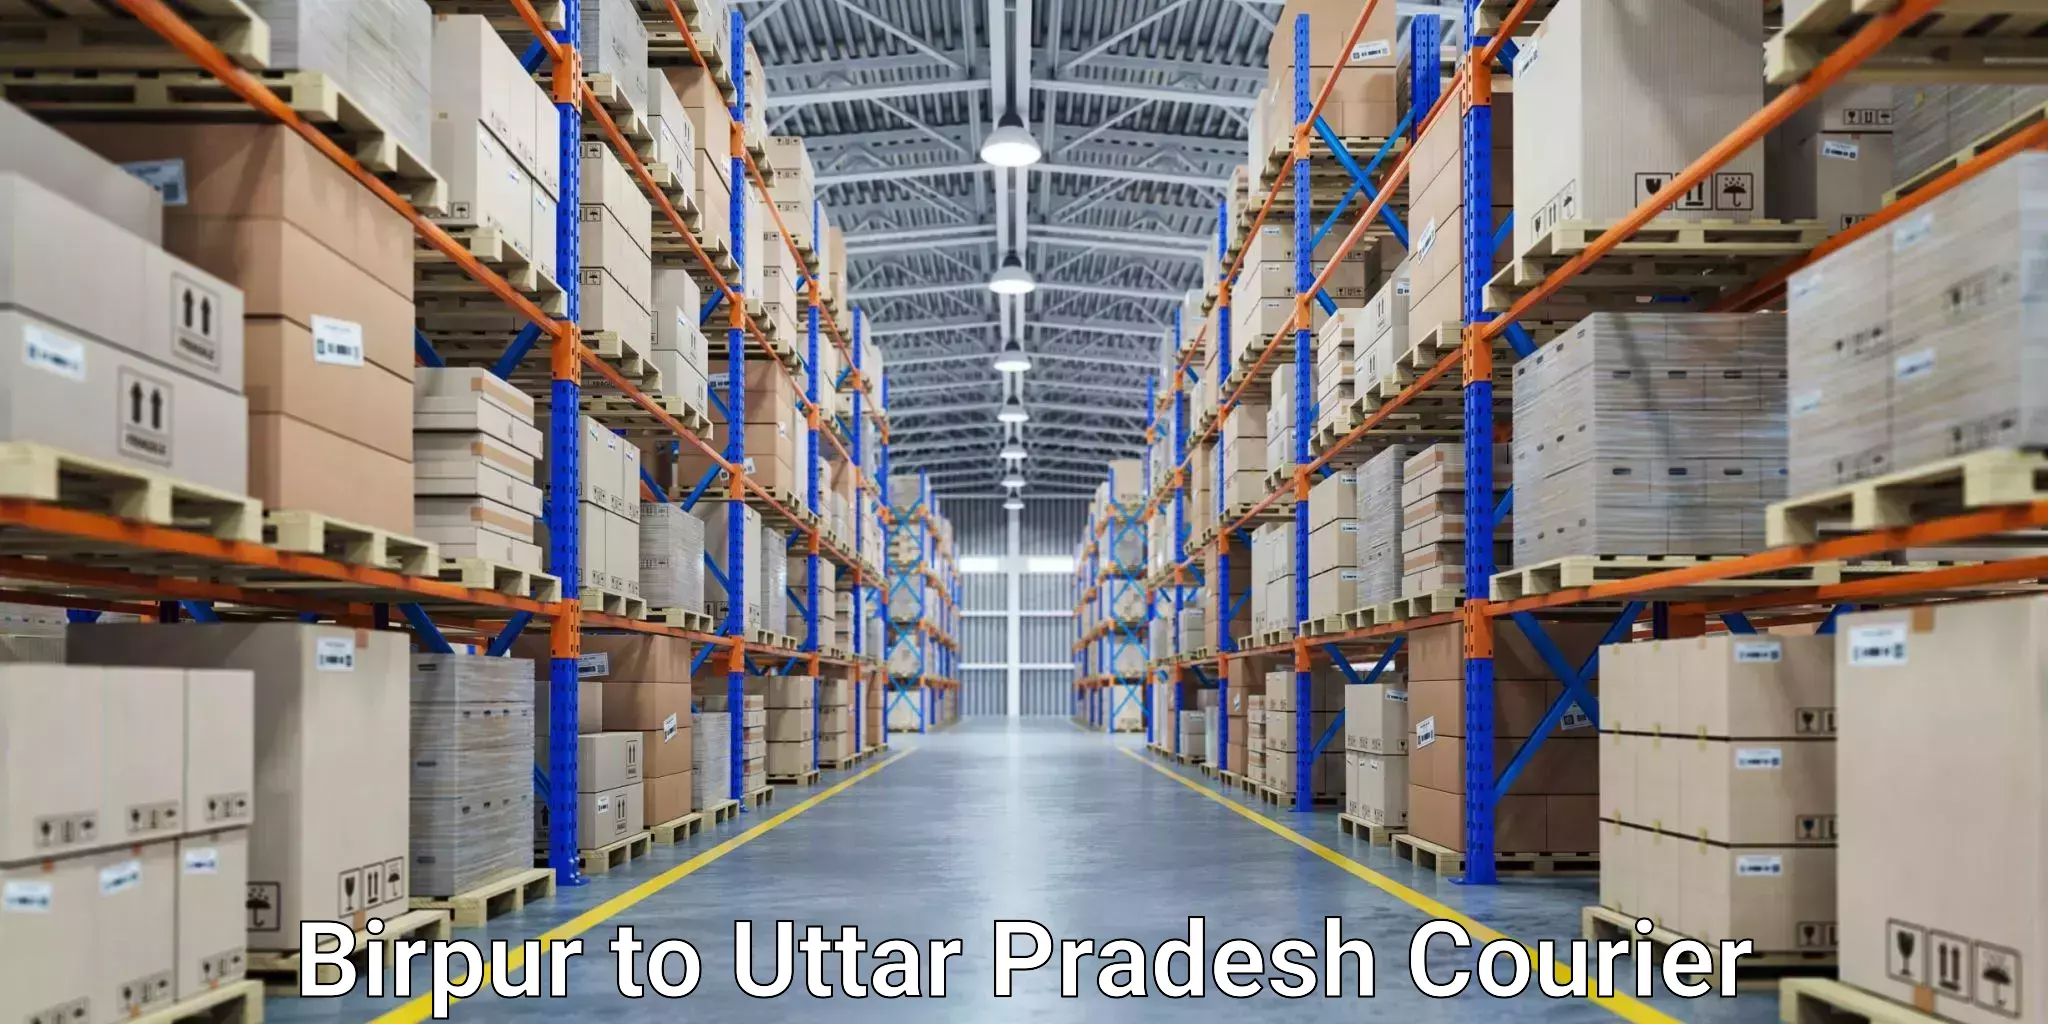 Affordable parcel service Birpur to Aligarh